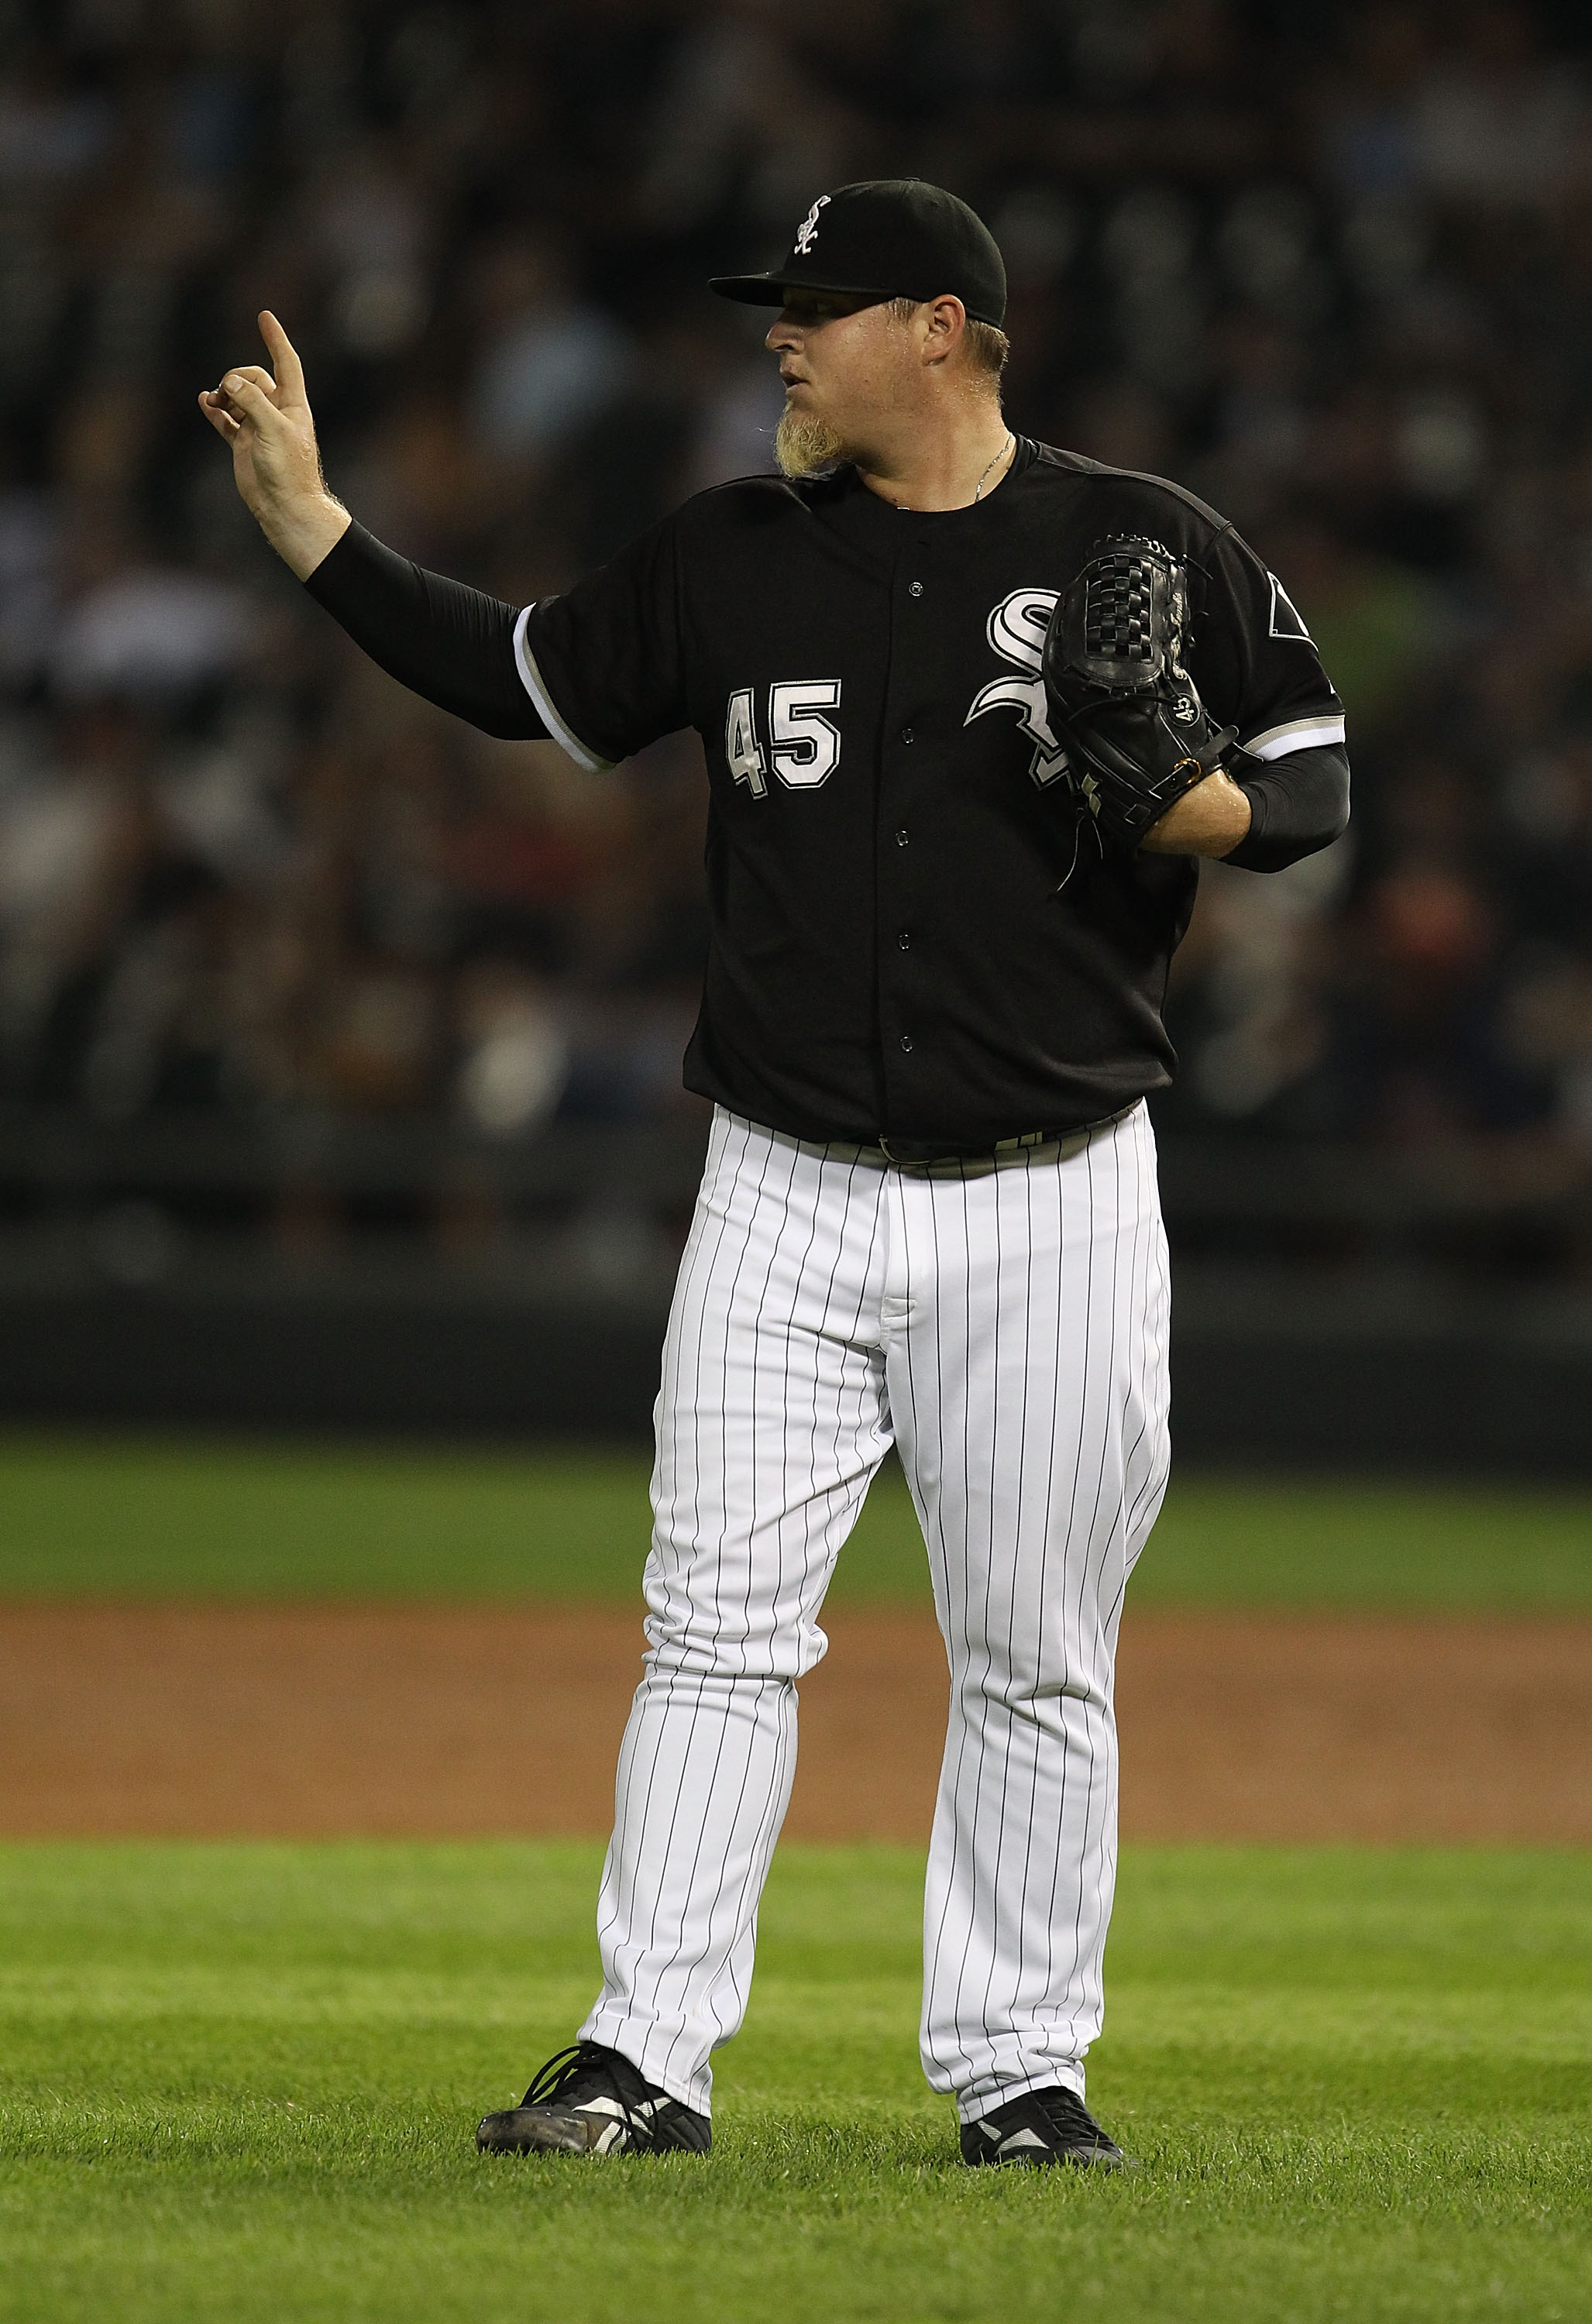 Bobby Jenks, former White Sox pitcher, shares how he overcame